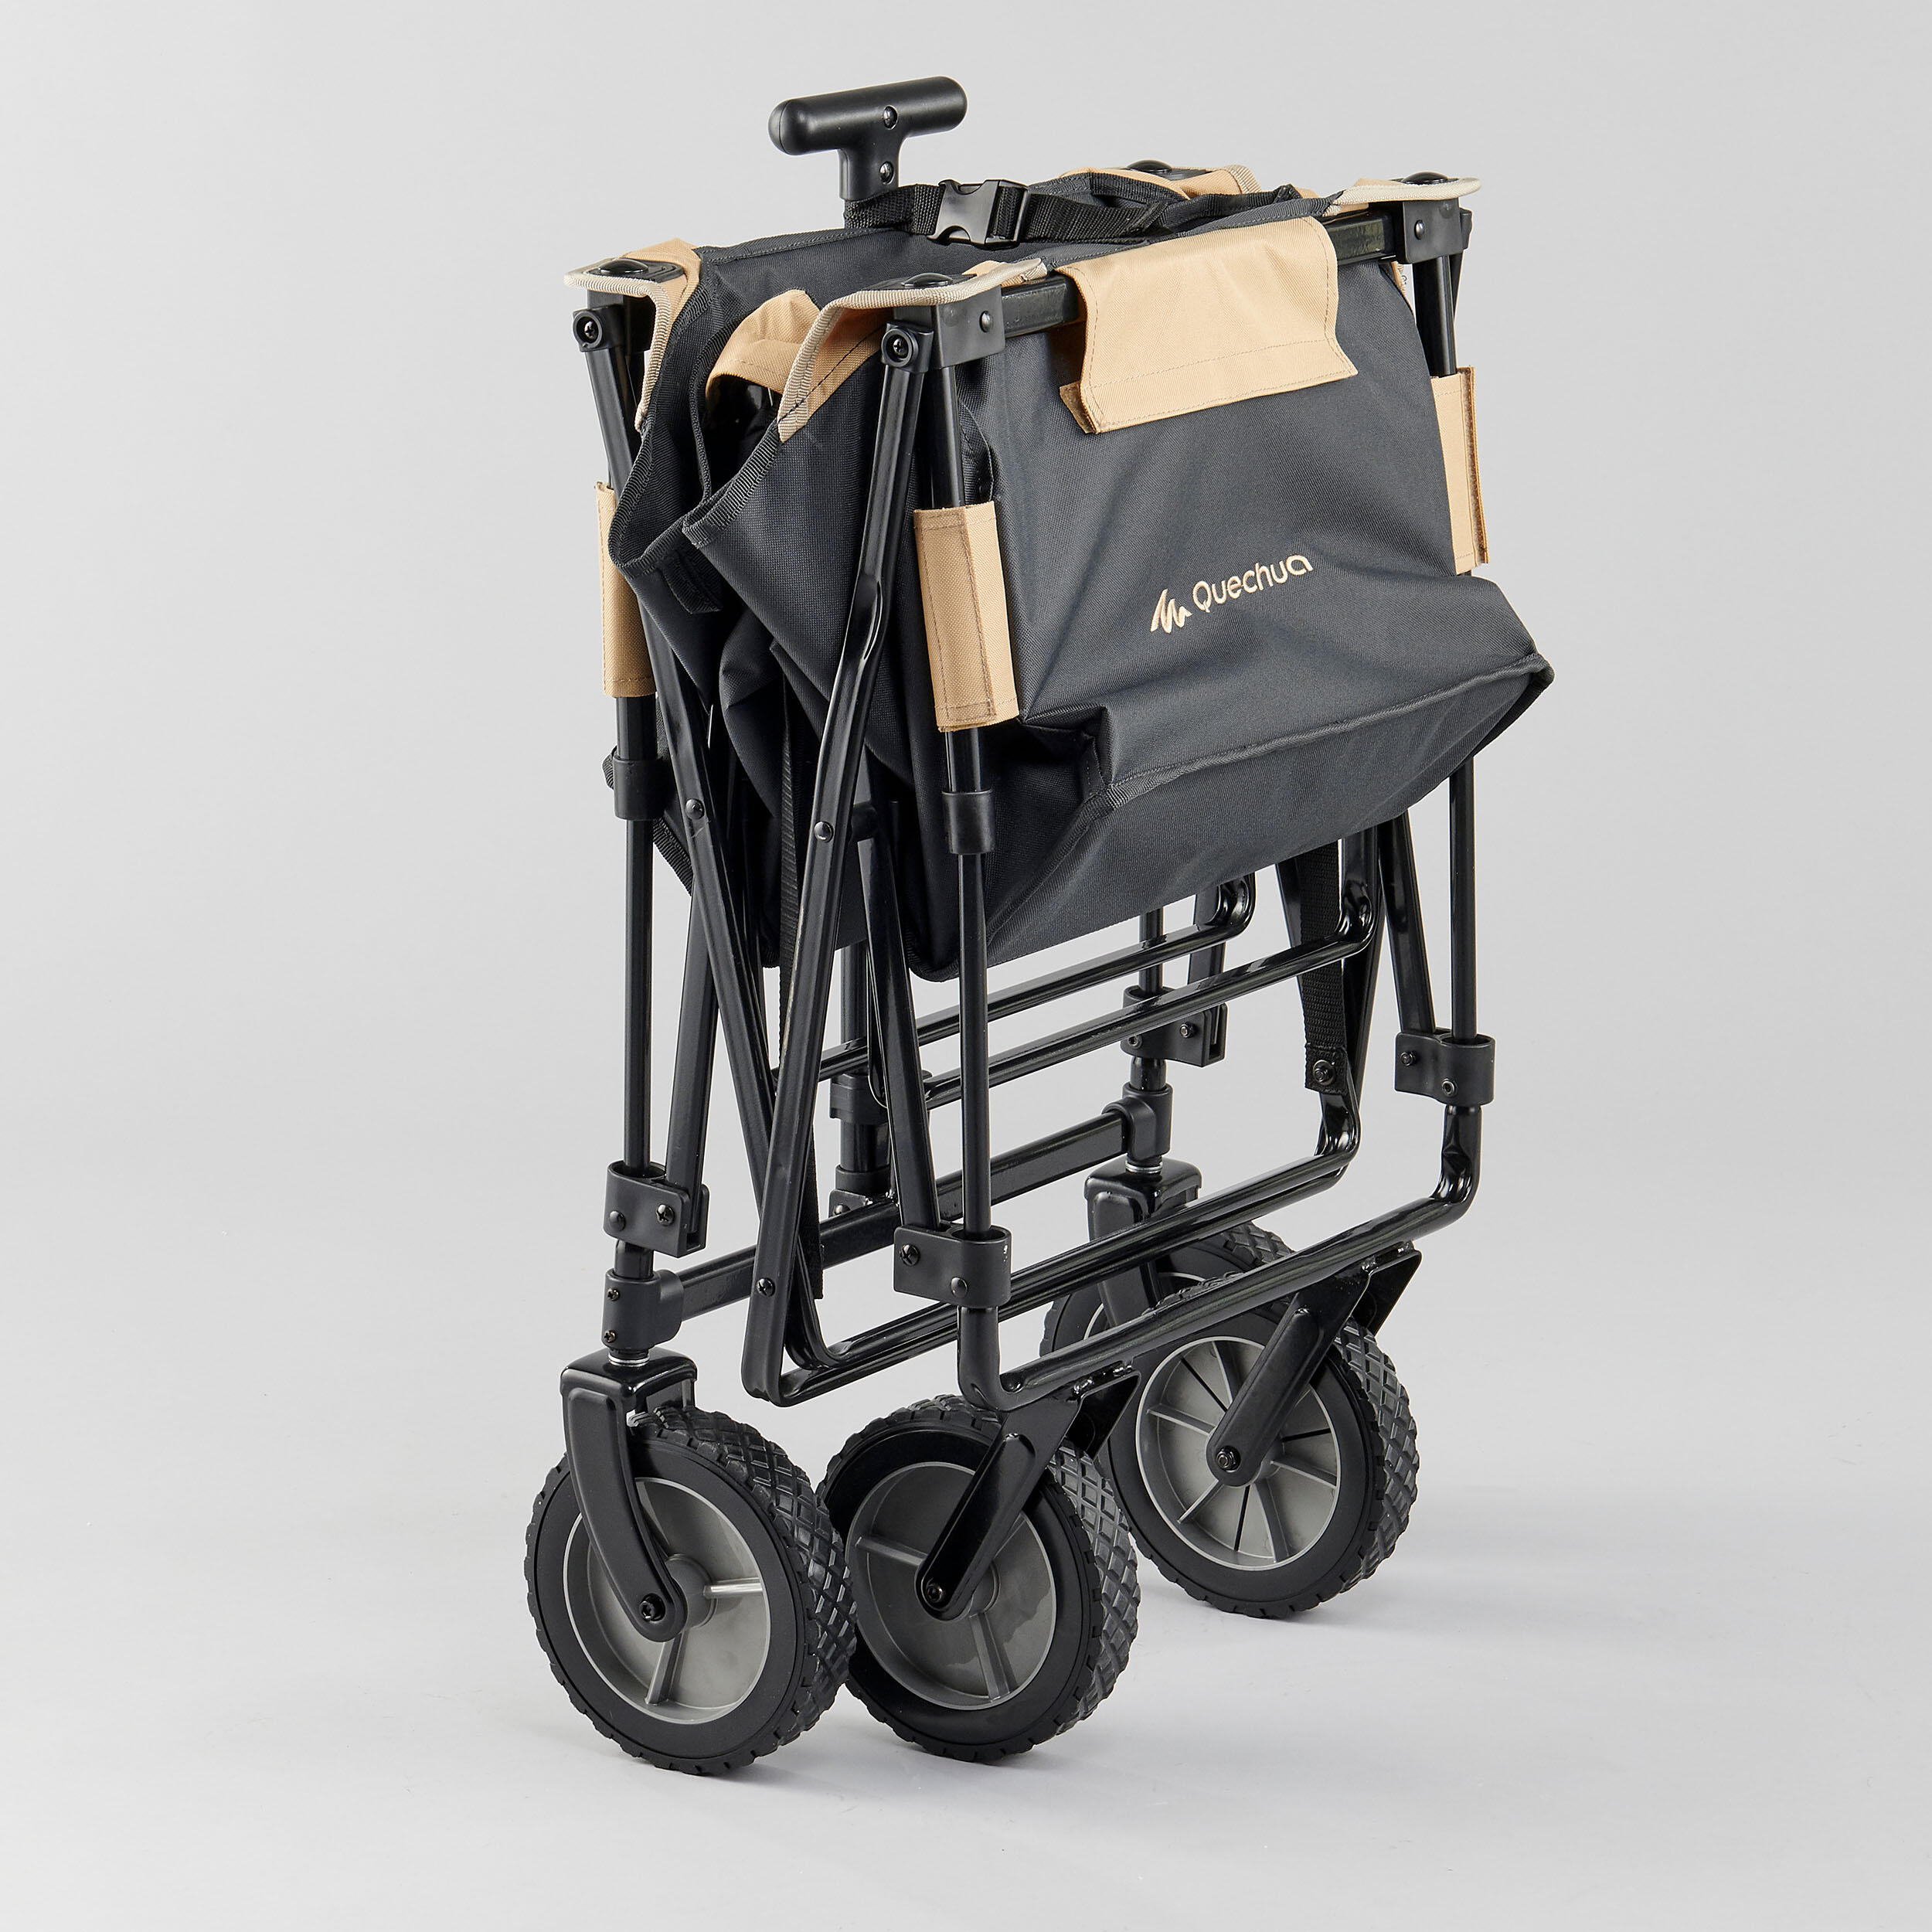 FOLDING TRANSPORT CART FOR CAMPING 